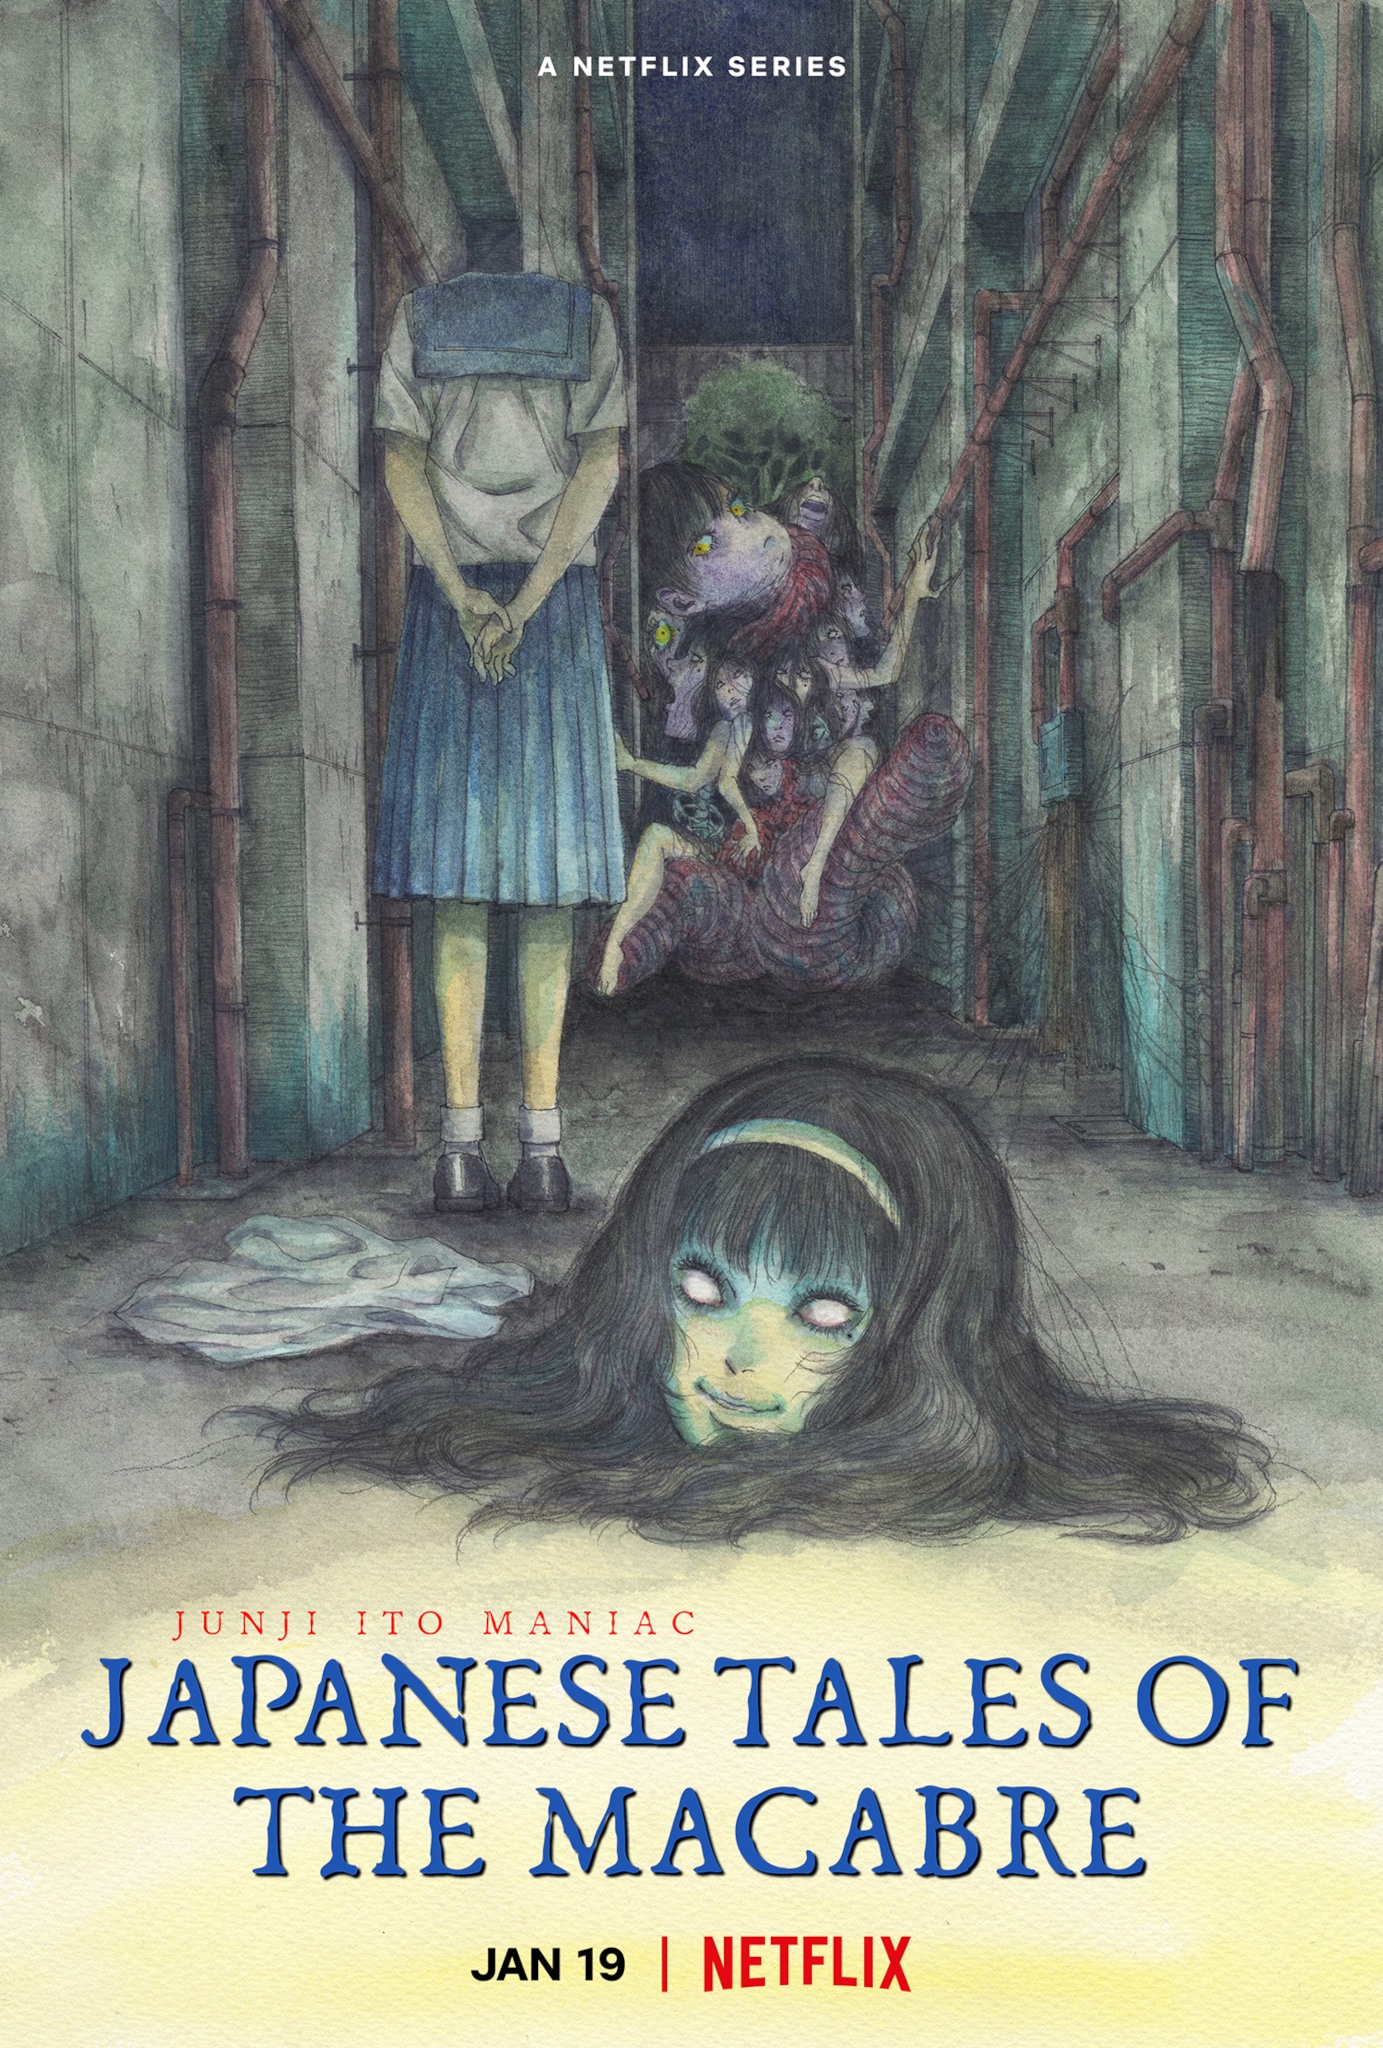 Affiche promotionnelle pour lanime netflix Junji Ito Maniac : Japanese Tales of the Macabre